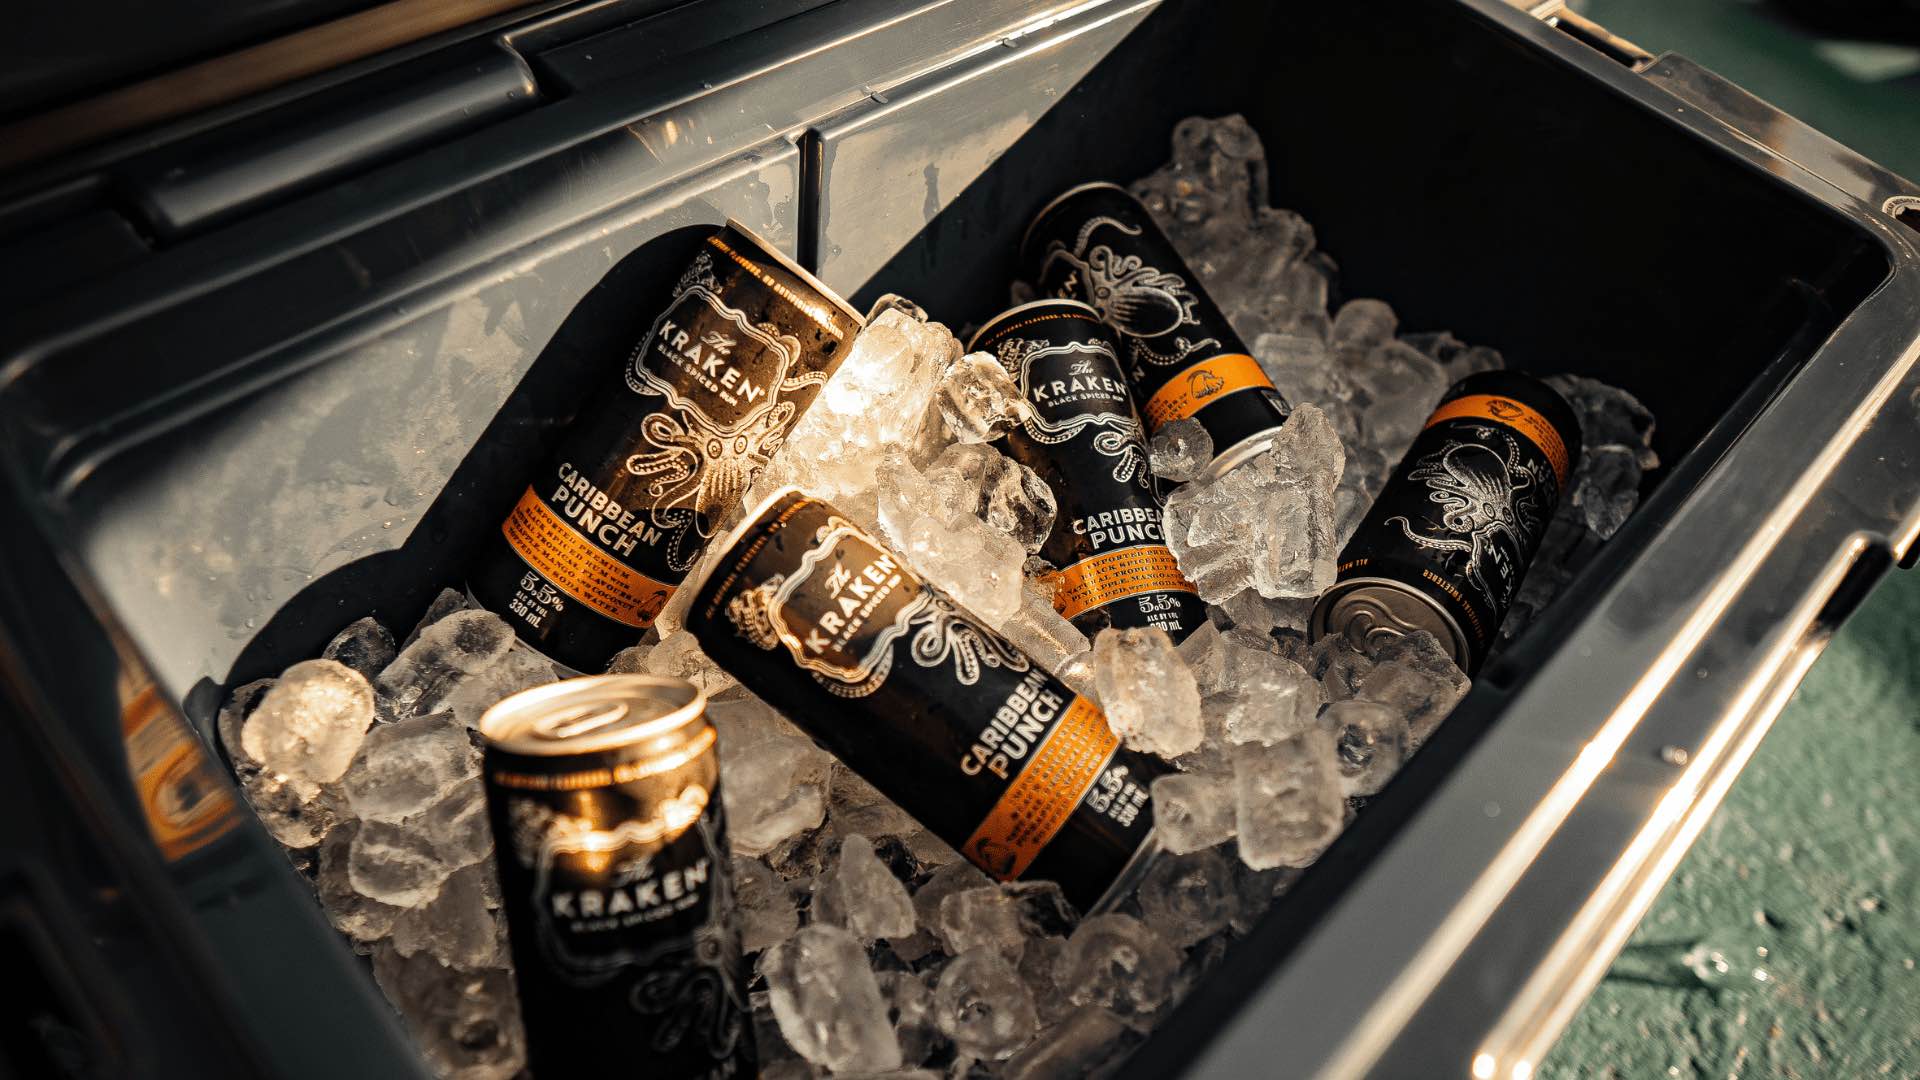 Cans of Kraken Caribbean Punch on ice.